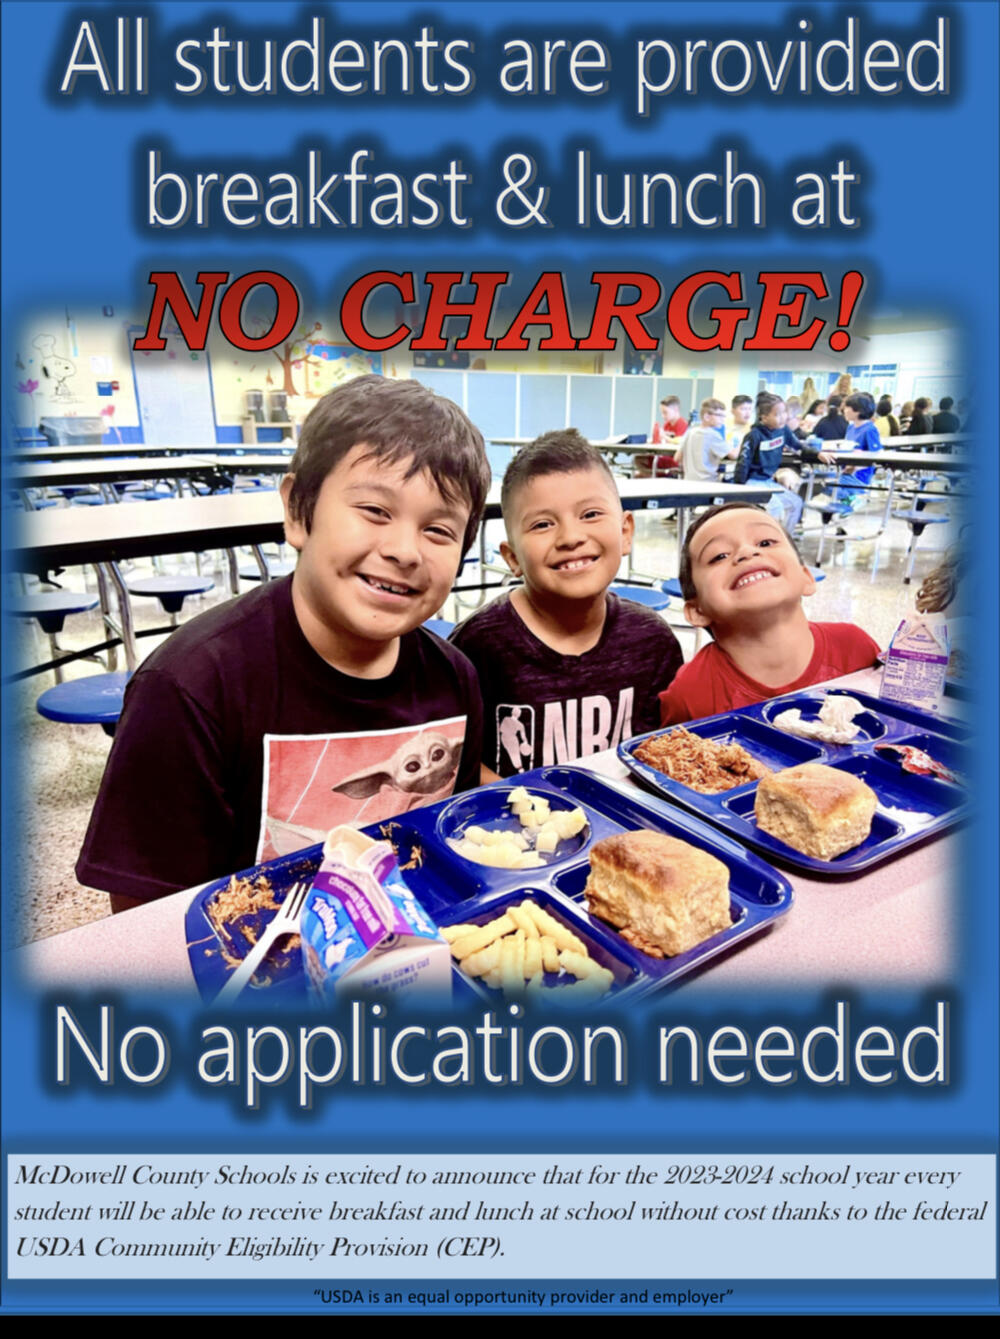 All students are provided breakfast and lunch at no charge